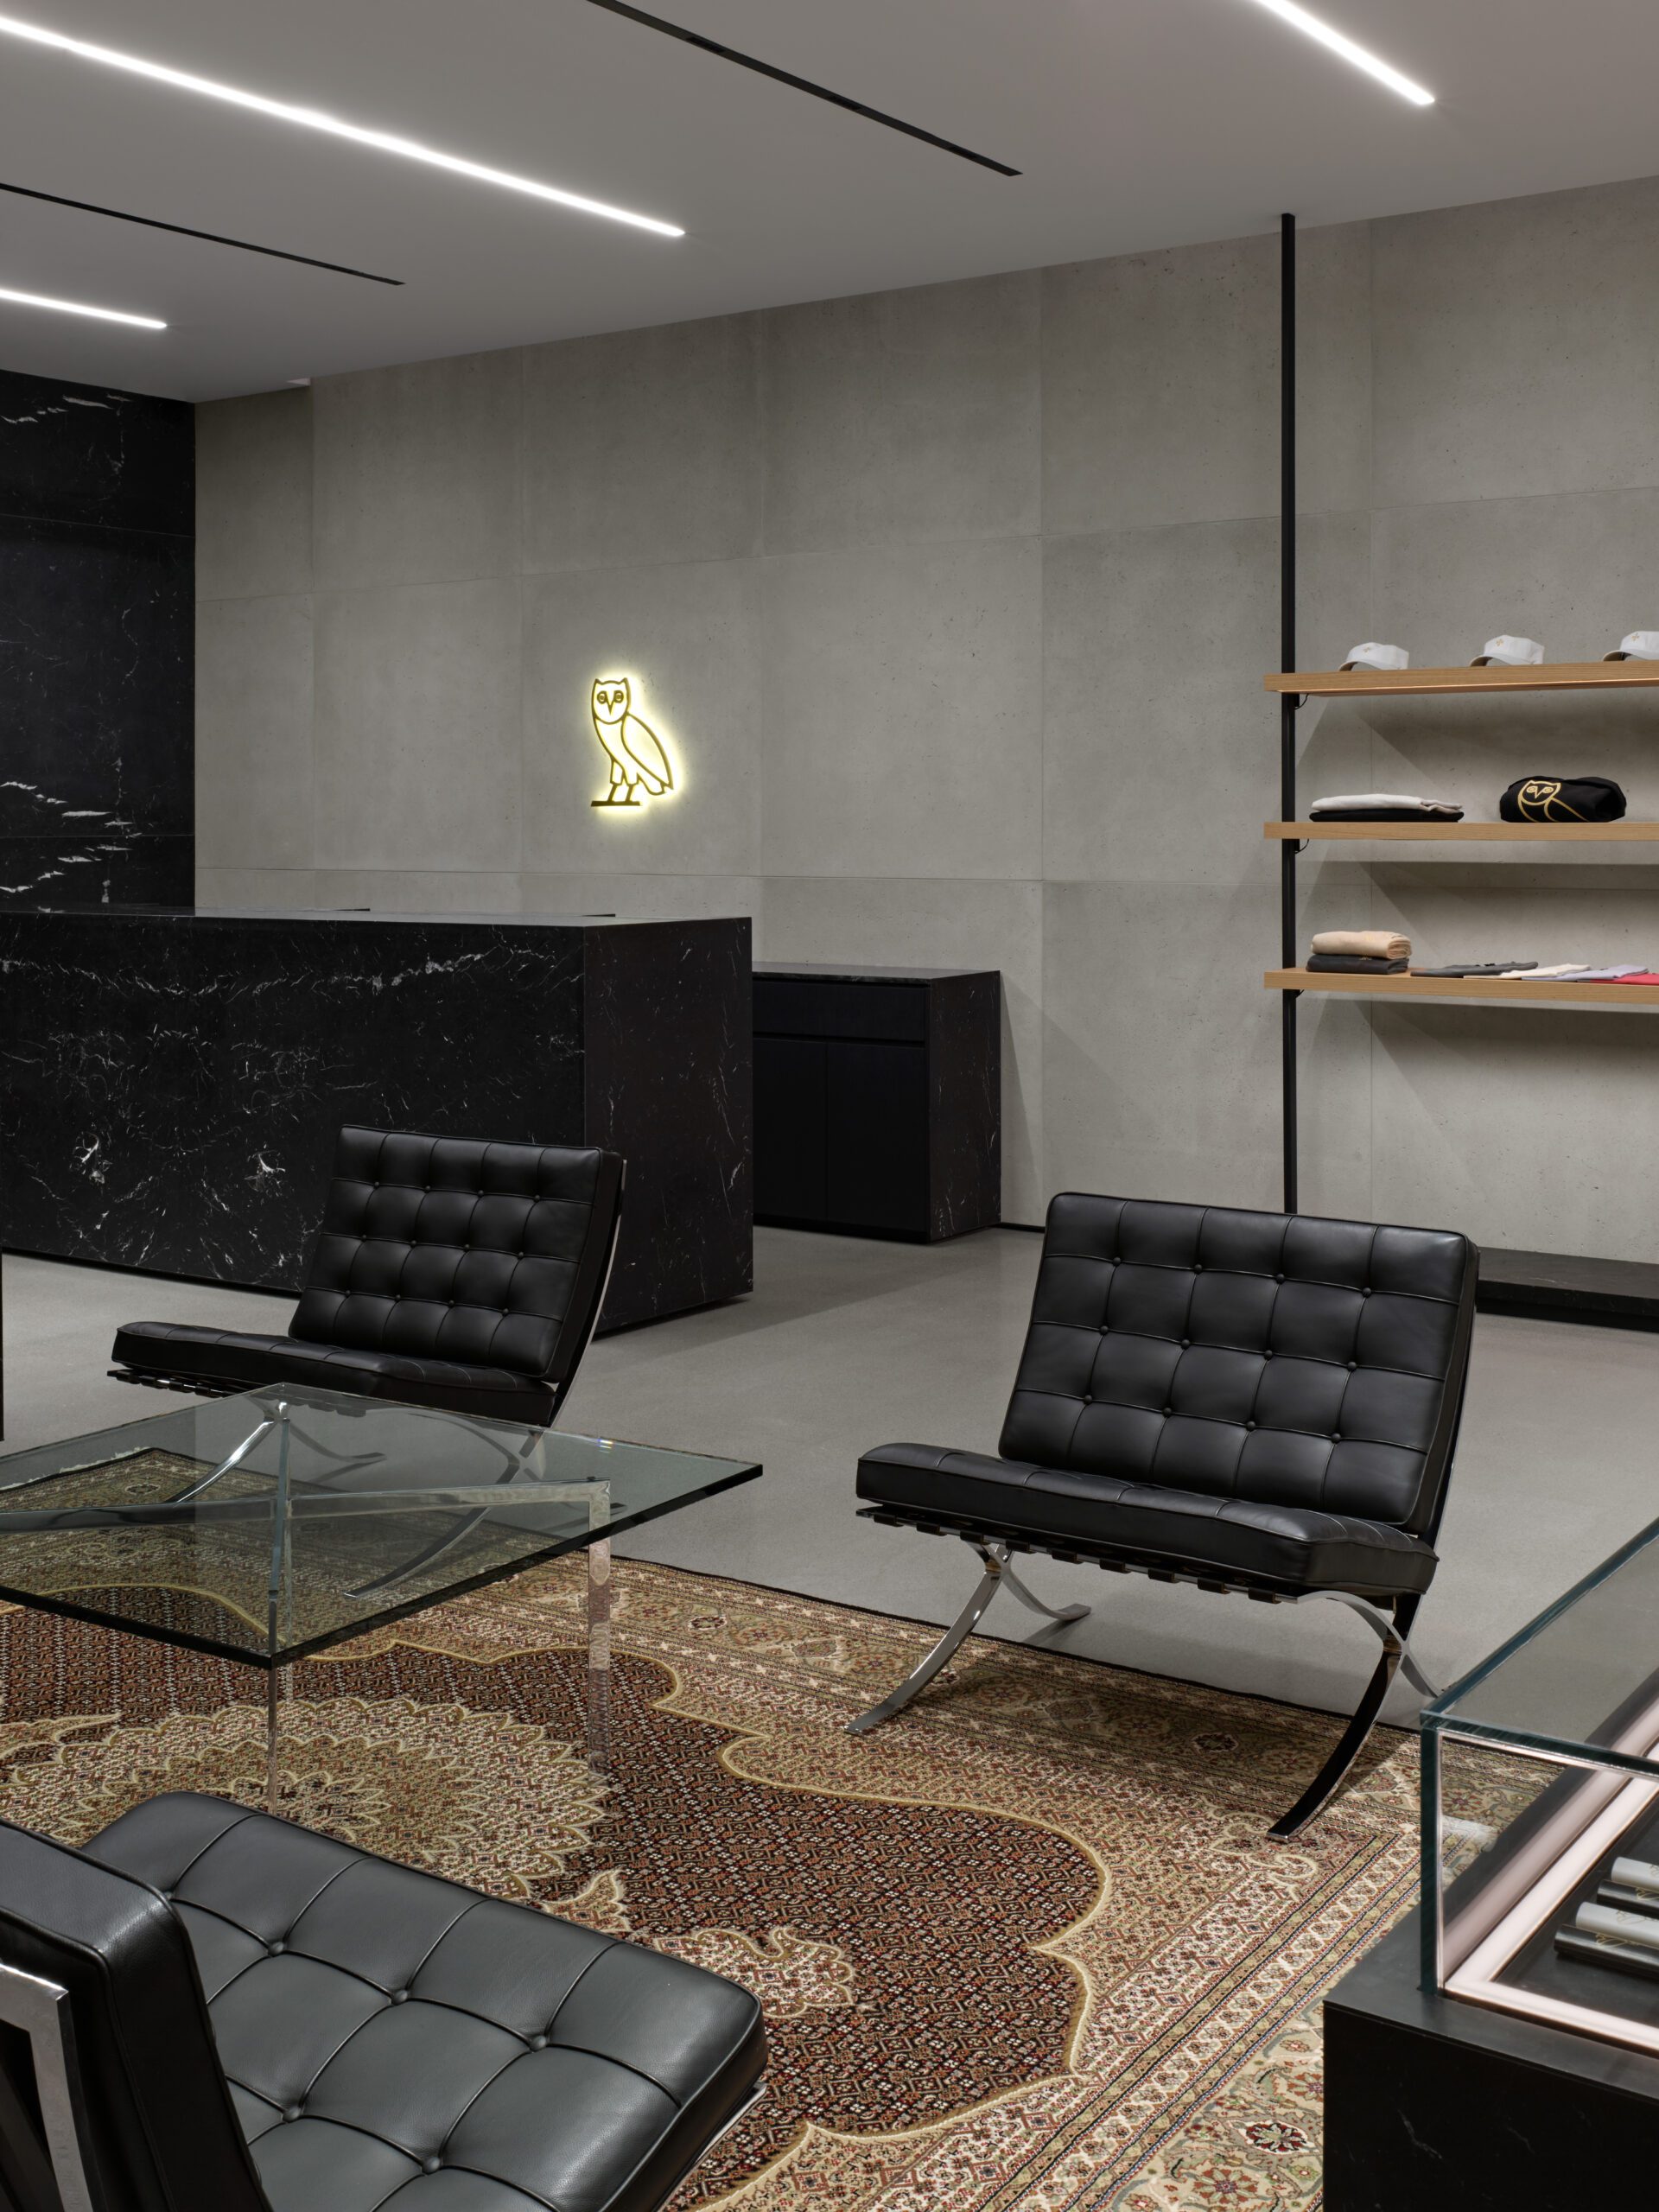 Modern retail space with black leather chairs and glass table, featuring OVO logo, clothing display shelves, and concrete cladding design.